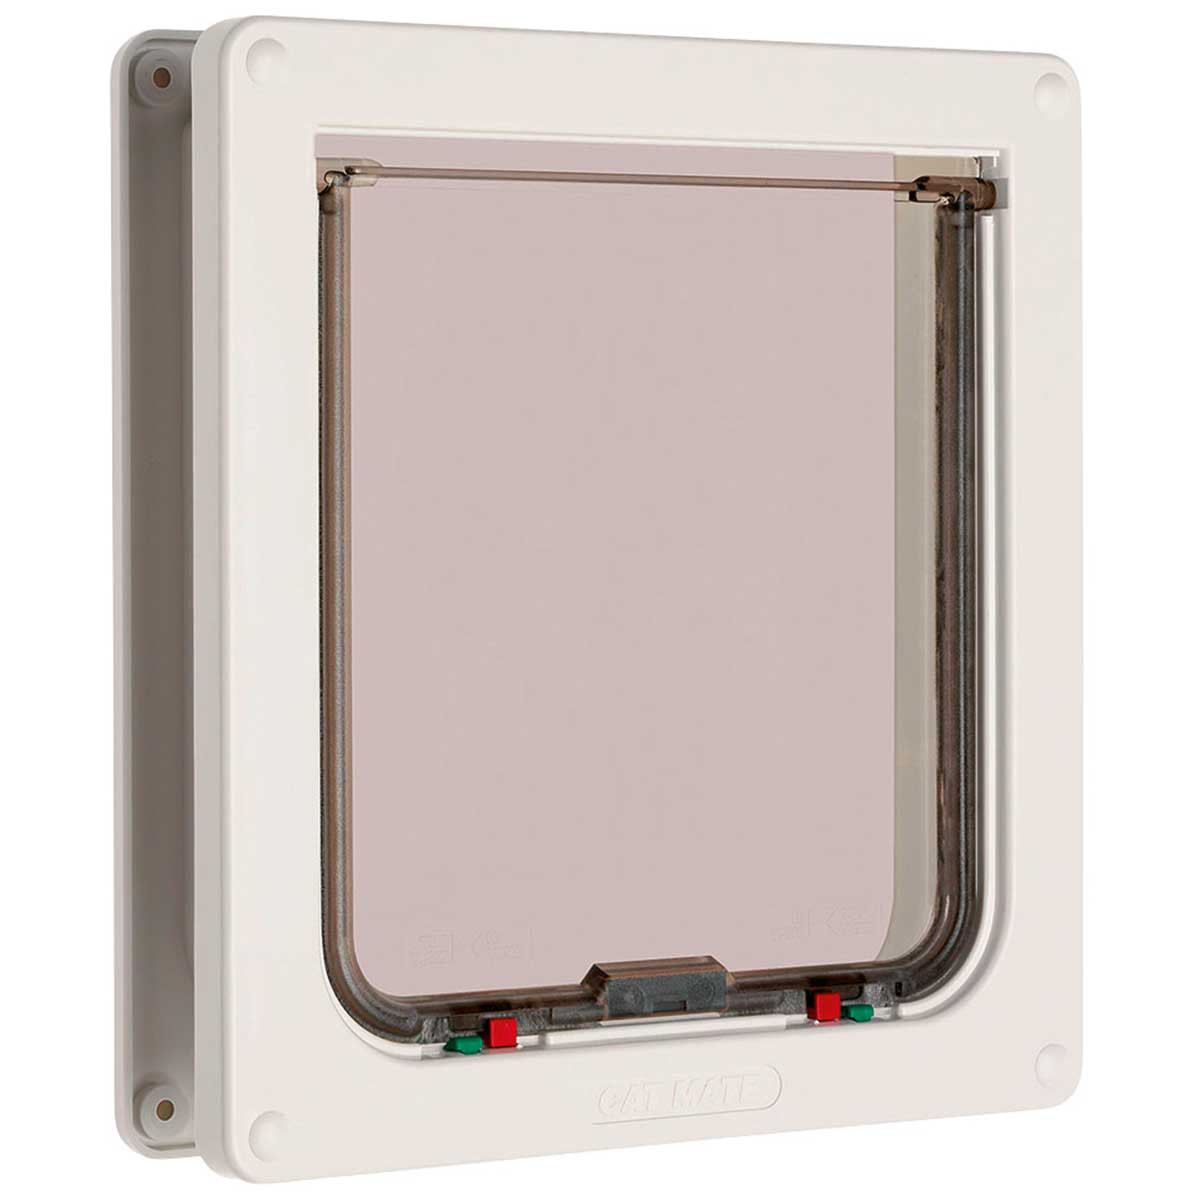 Cat Mate cat flap 221 XL, 4-way with tunnel